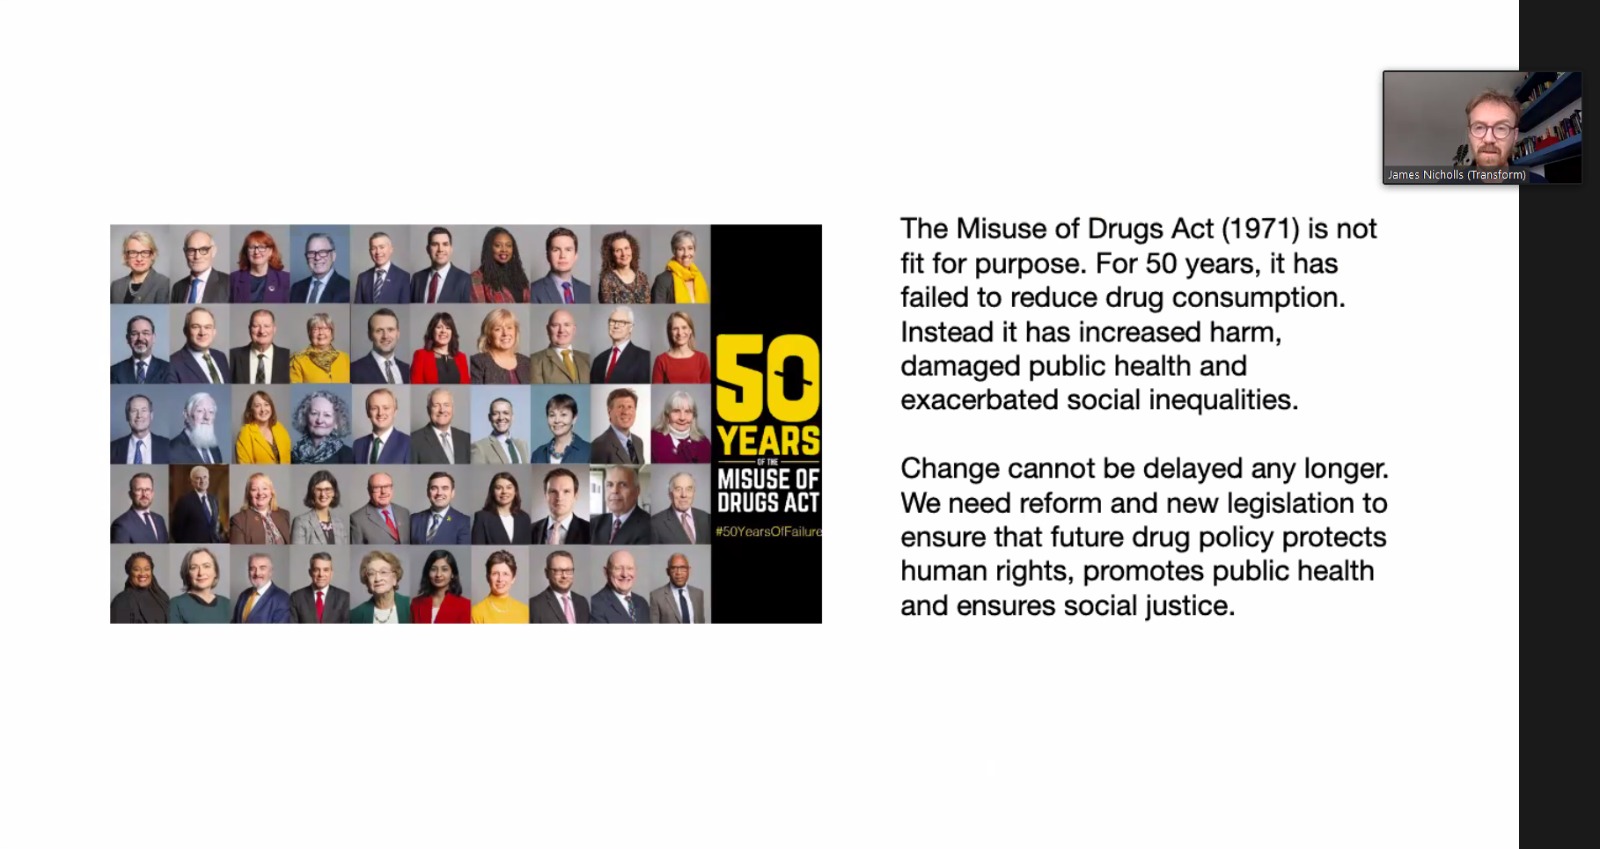 Promotional Material from the All-Party Parliamentary Group on Drug Policy Reform arguing that the Misuse of Drugs Act 1971 is 'no longer fit for purpose'